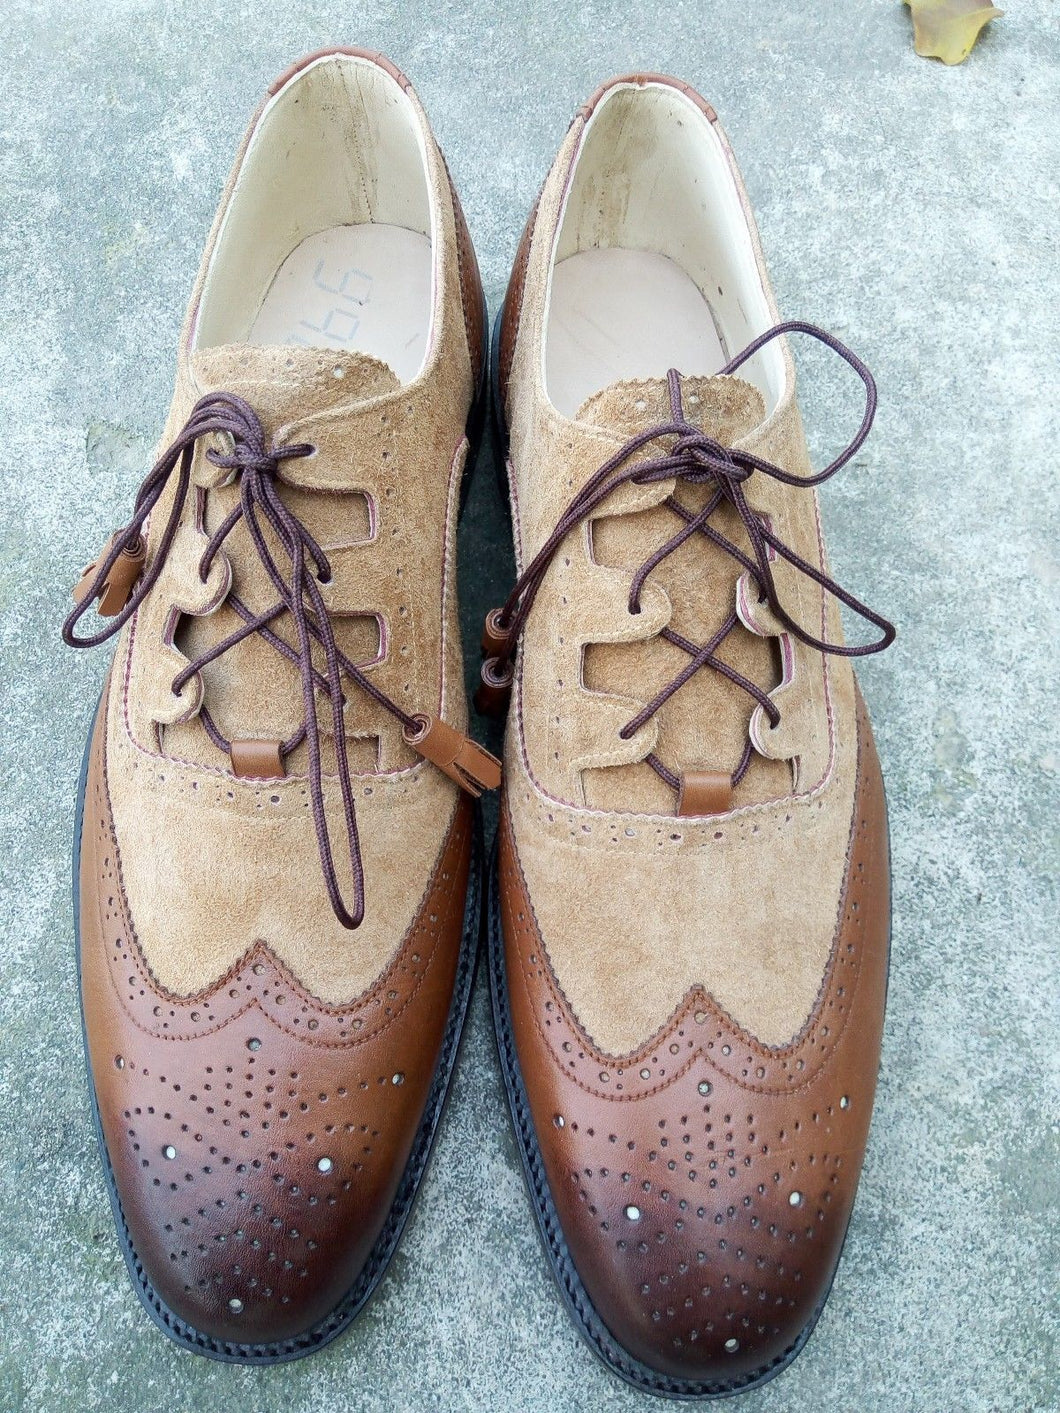 Handmade Men's Two Tone Shoes,Leather and Suede Wing Tip shoes